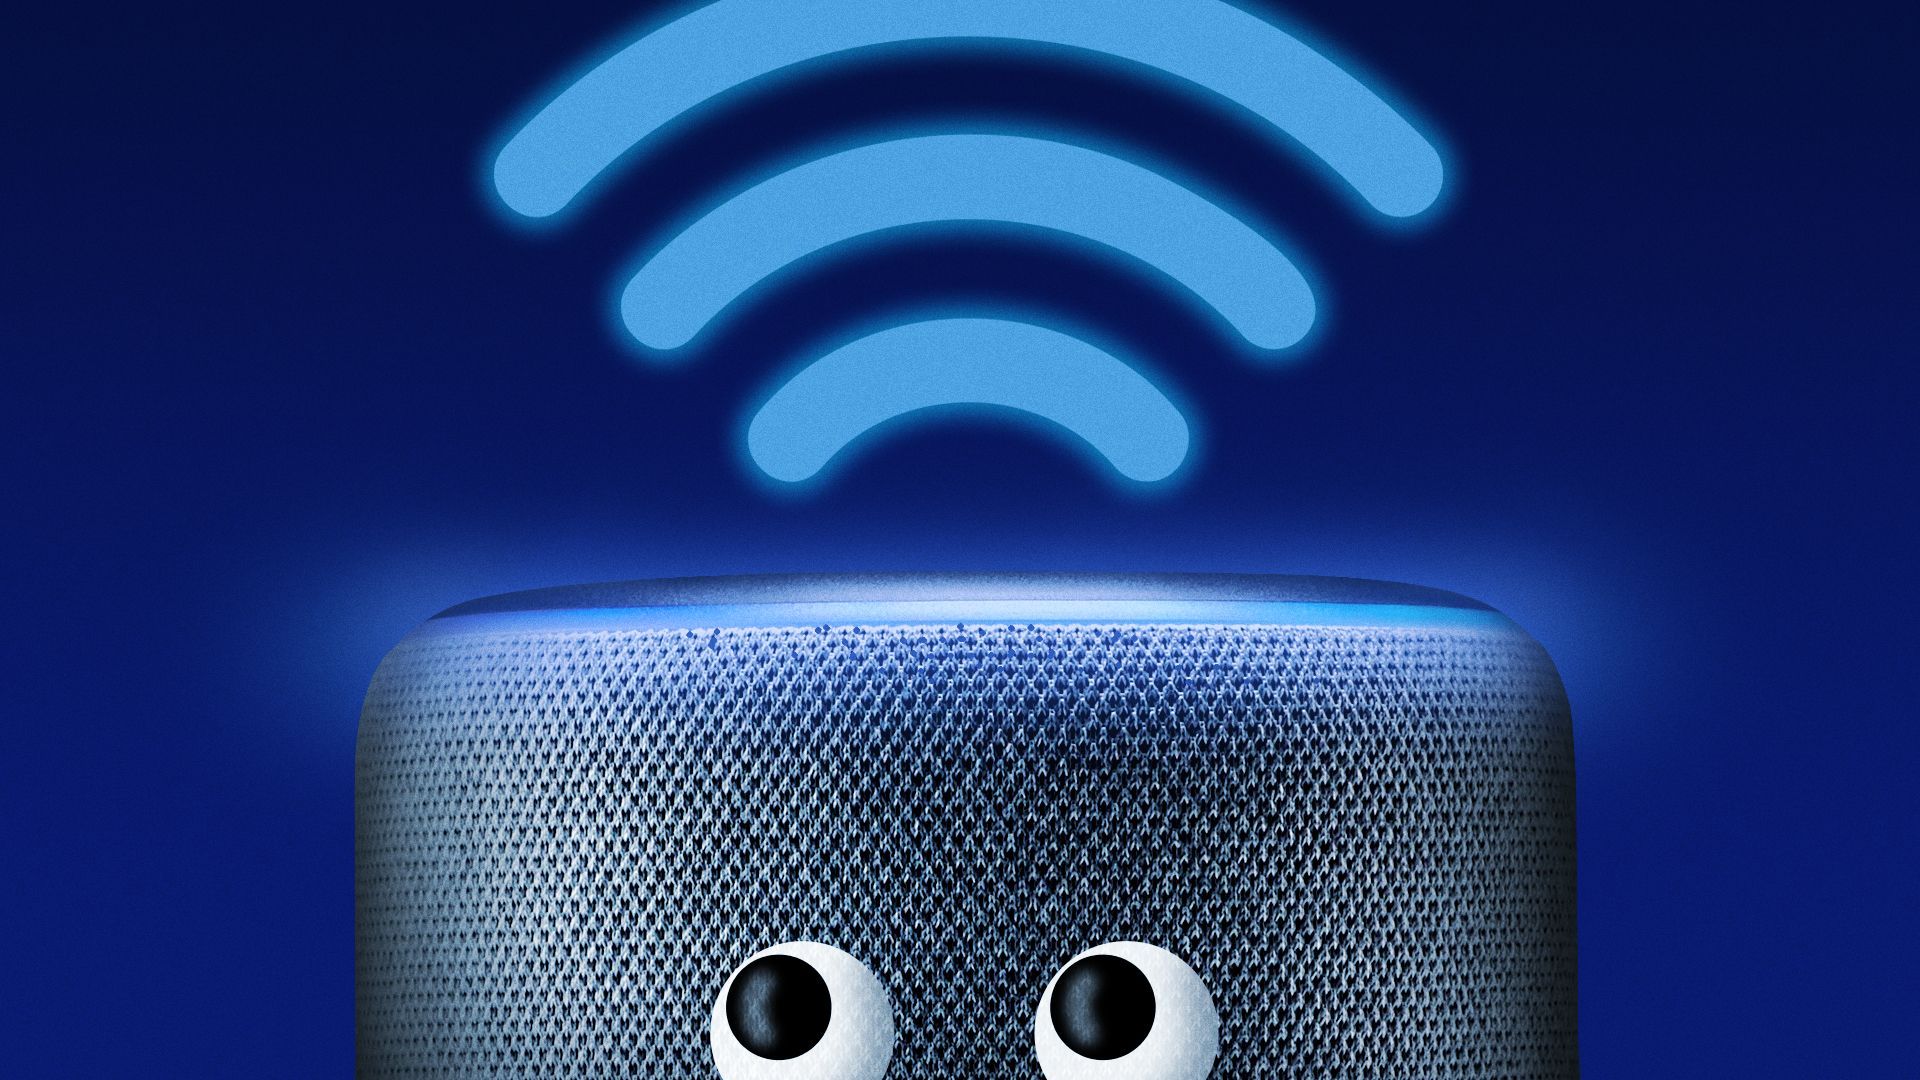 Photo illustration of a smart speaker with eyes looking up at a glowing wifi symbol.